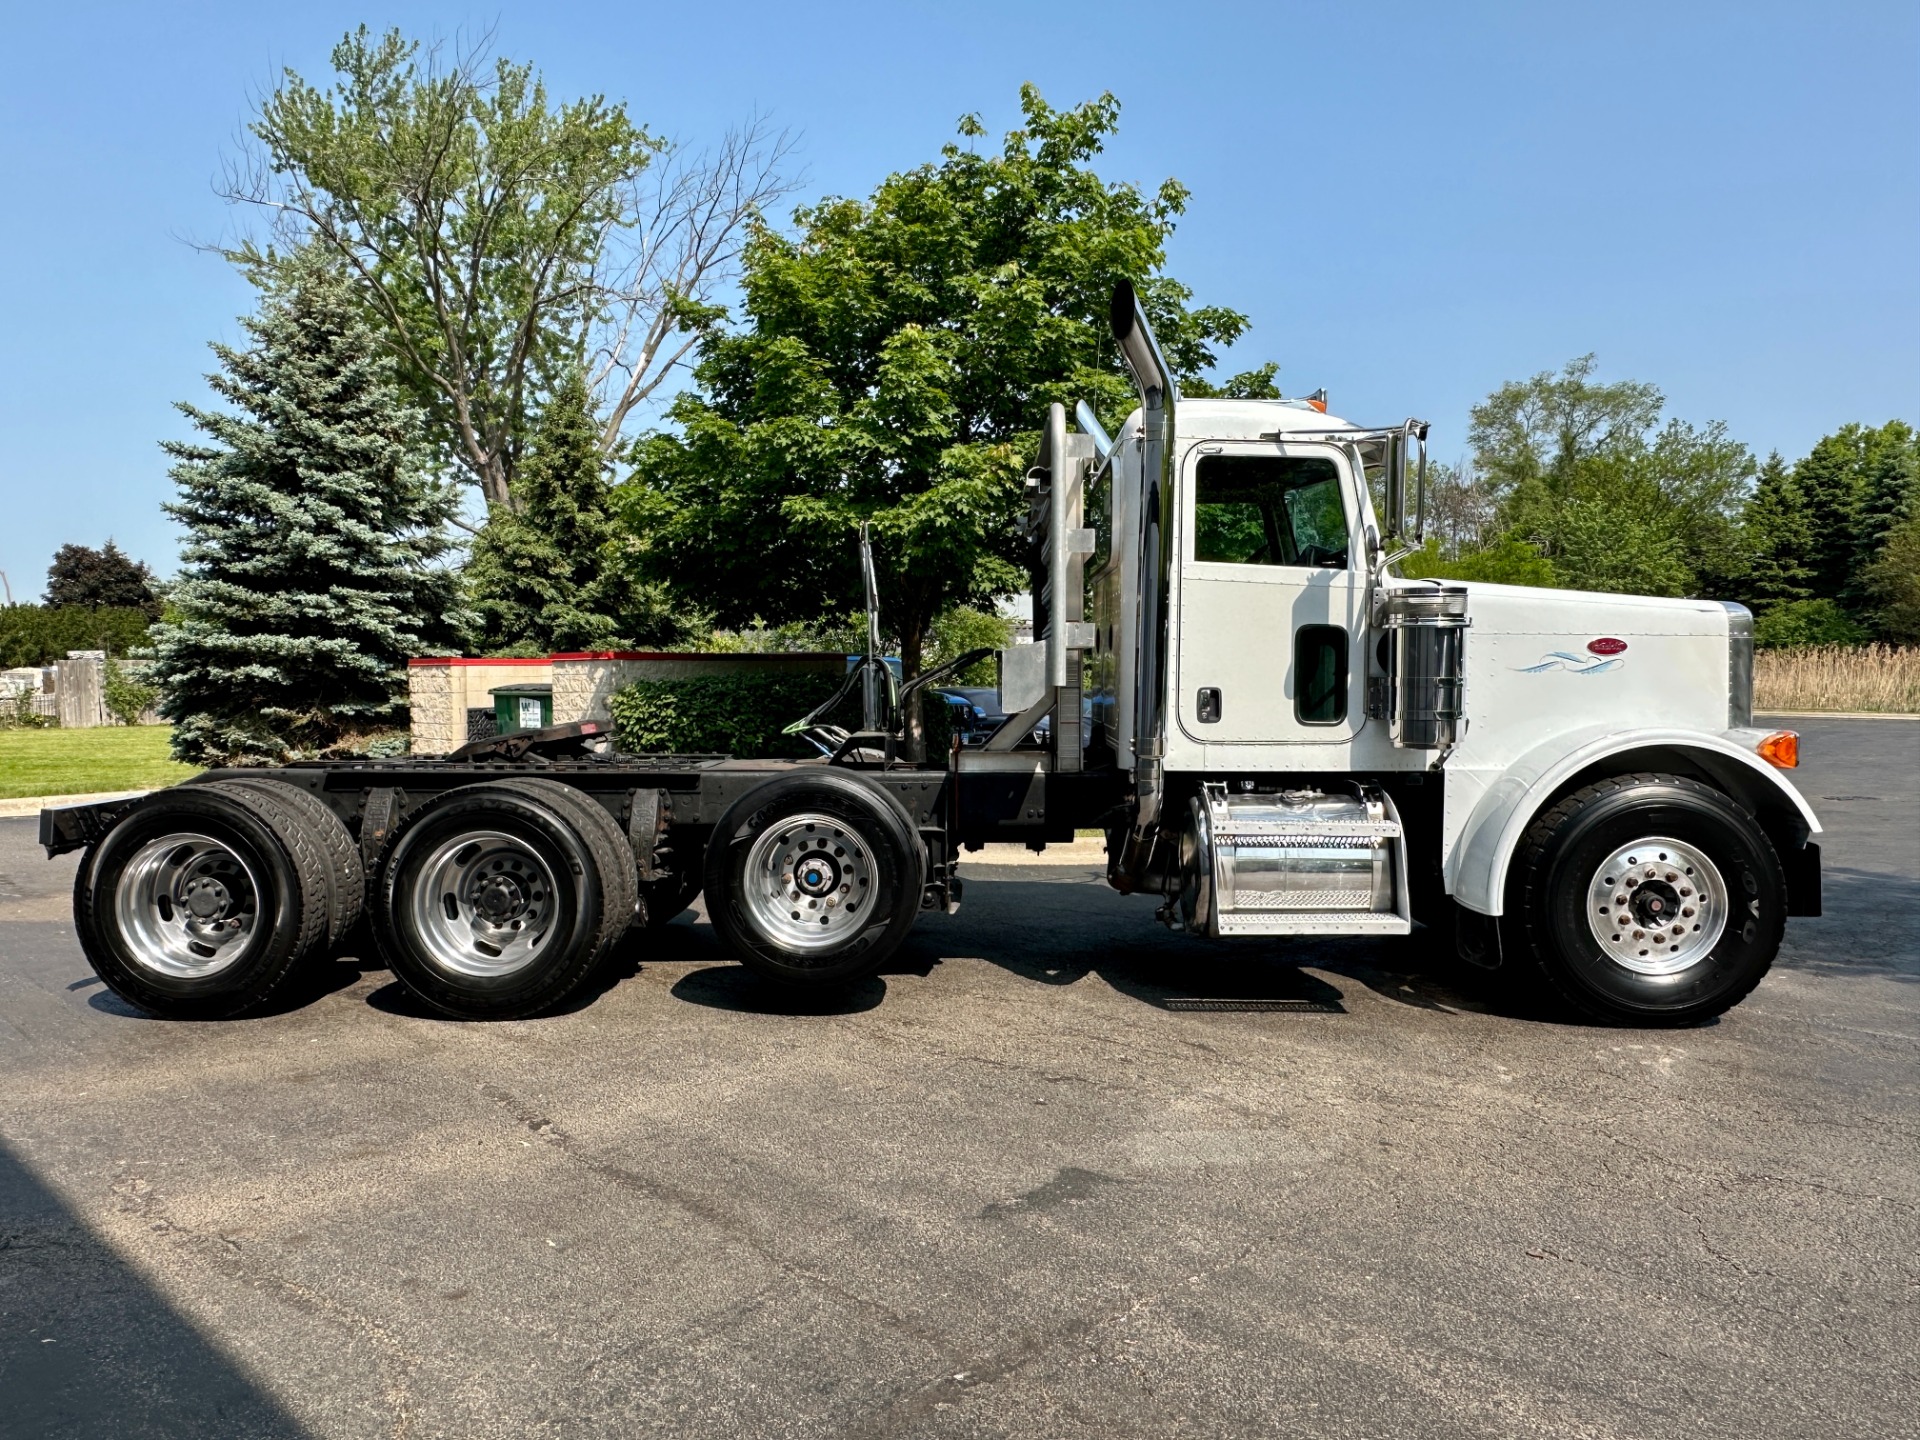 Used-2005-Peterbilt-379-Tri-Axle-Day-Cab---Cat-C15-Power---Two-Line-Wet-Kit---PTO